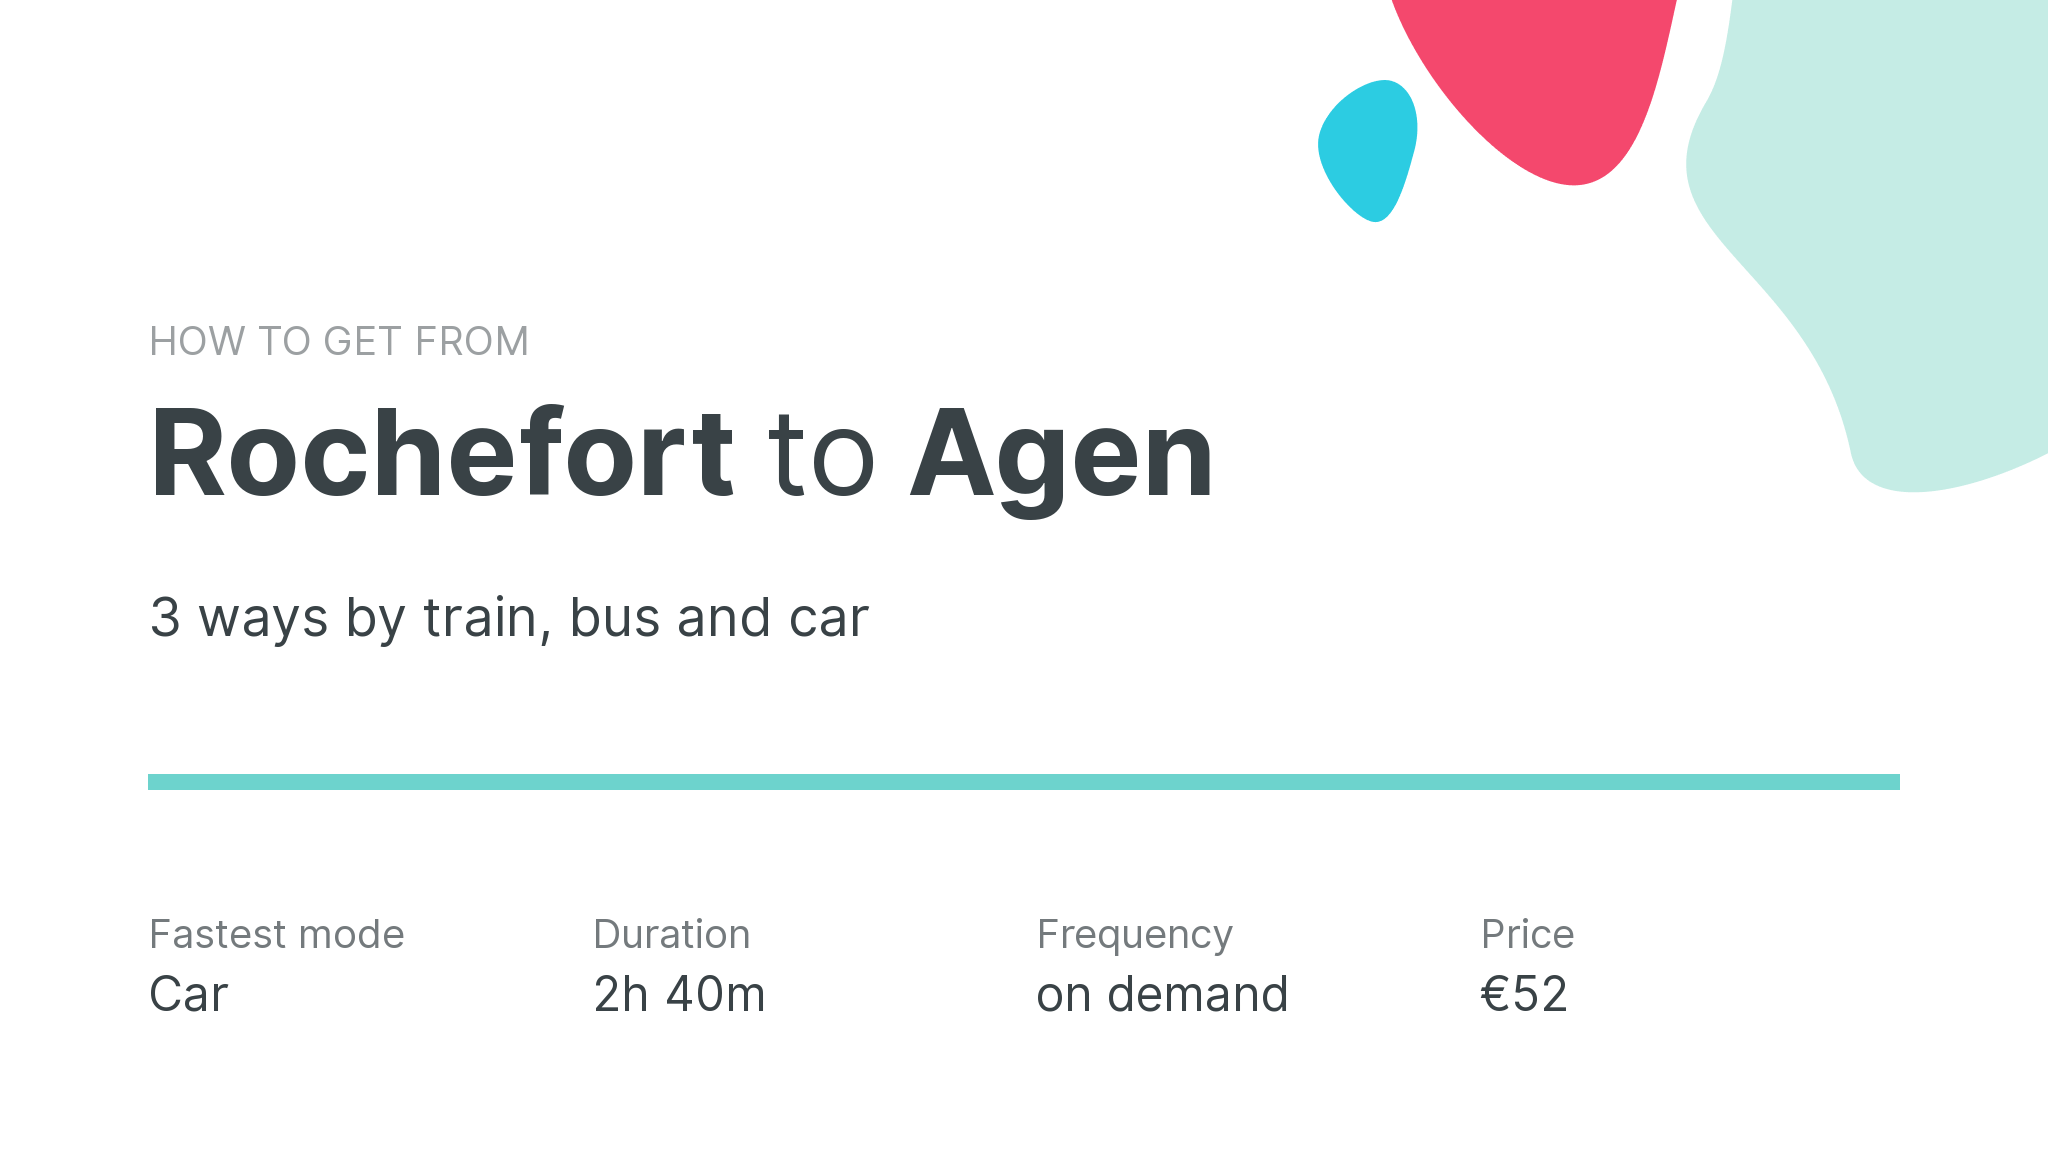 How do I get from Rochefort to Agen